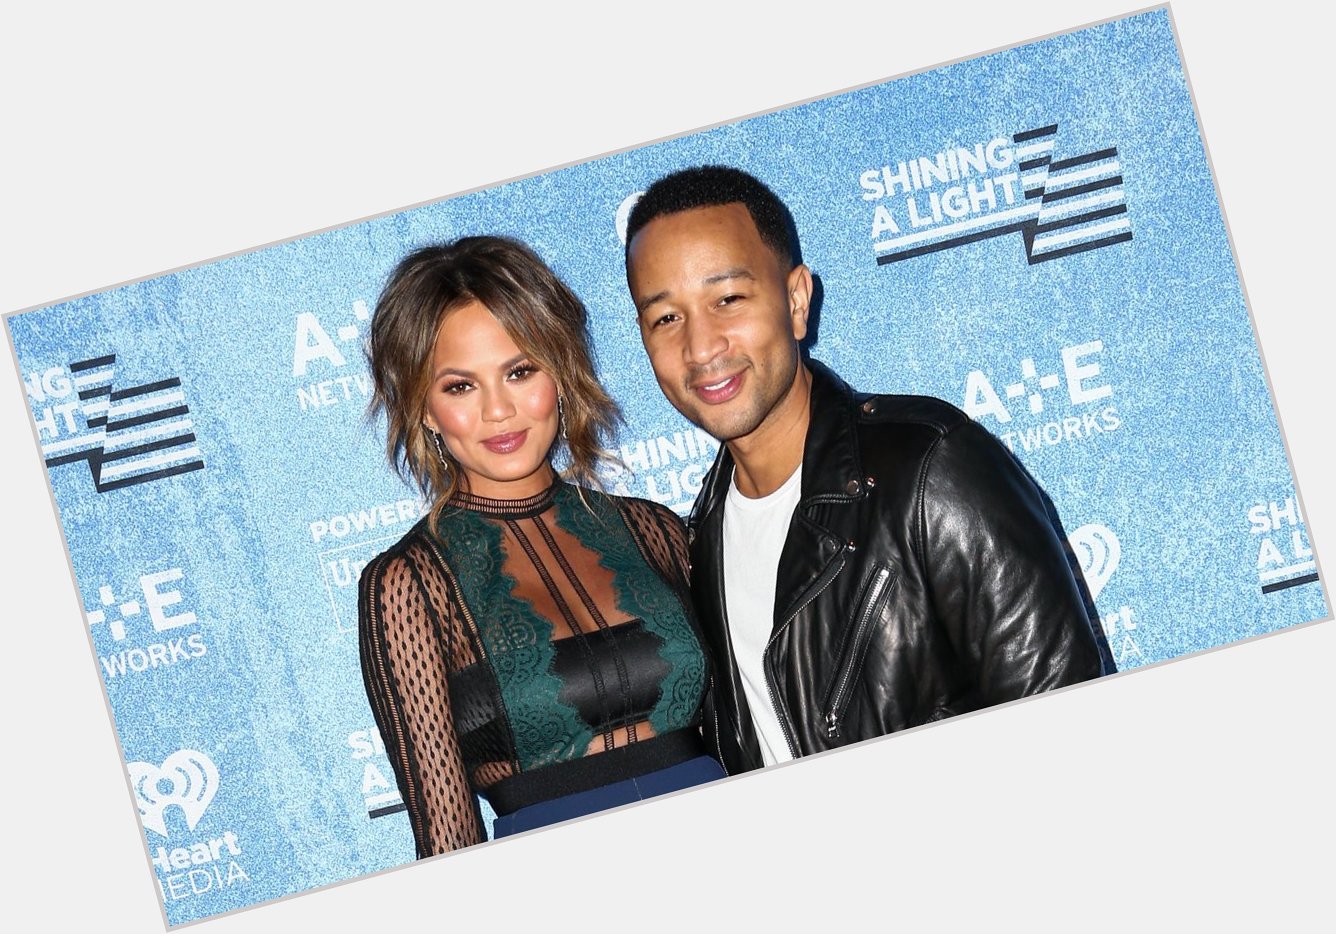 HuffingtonPost: Chrissy Teigen wishes John Legend a happy birthday in a way only she could  